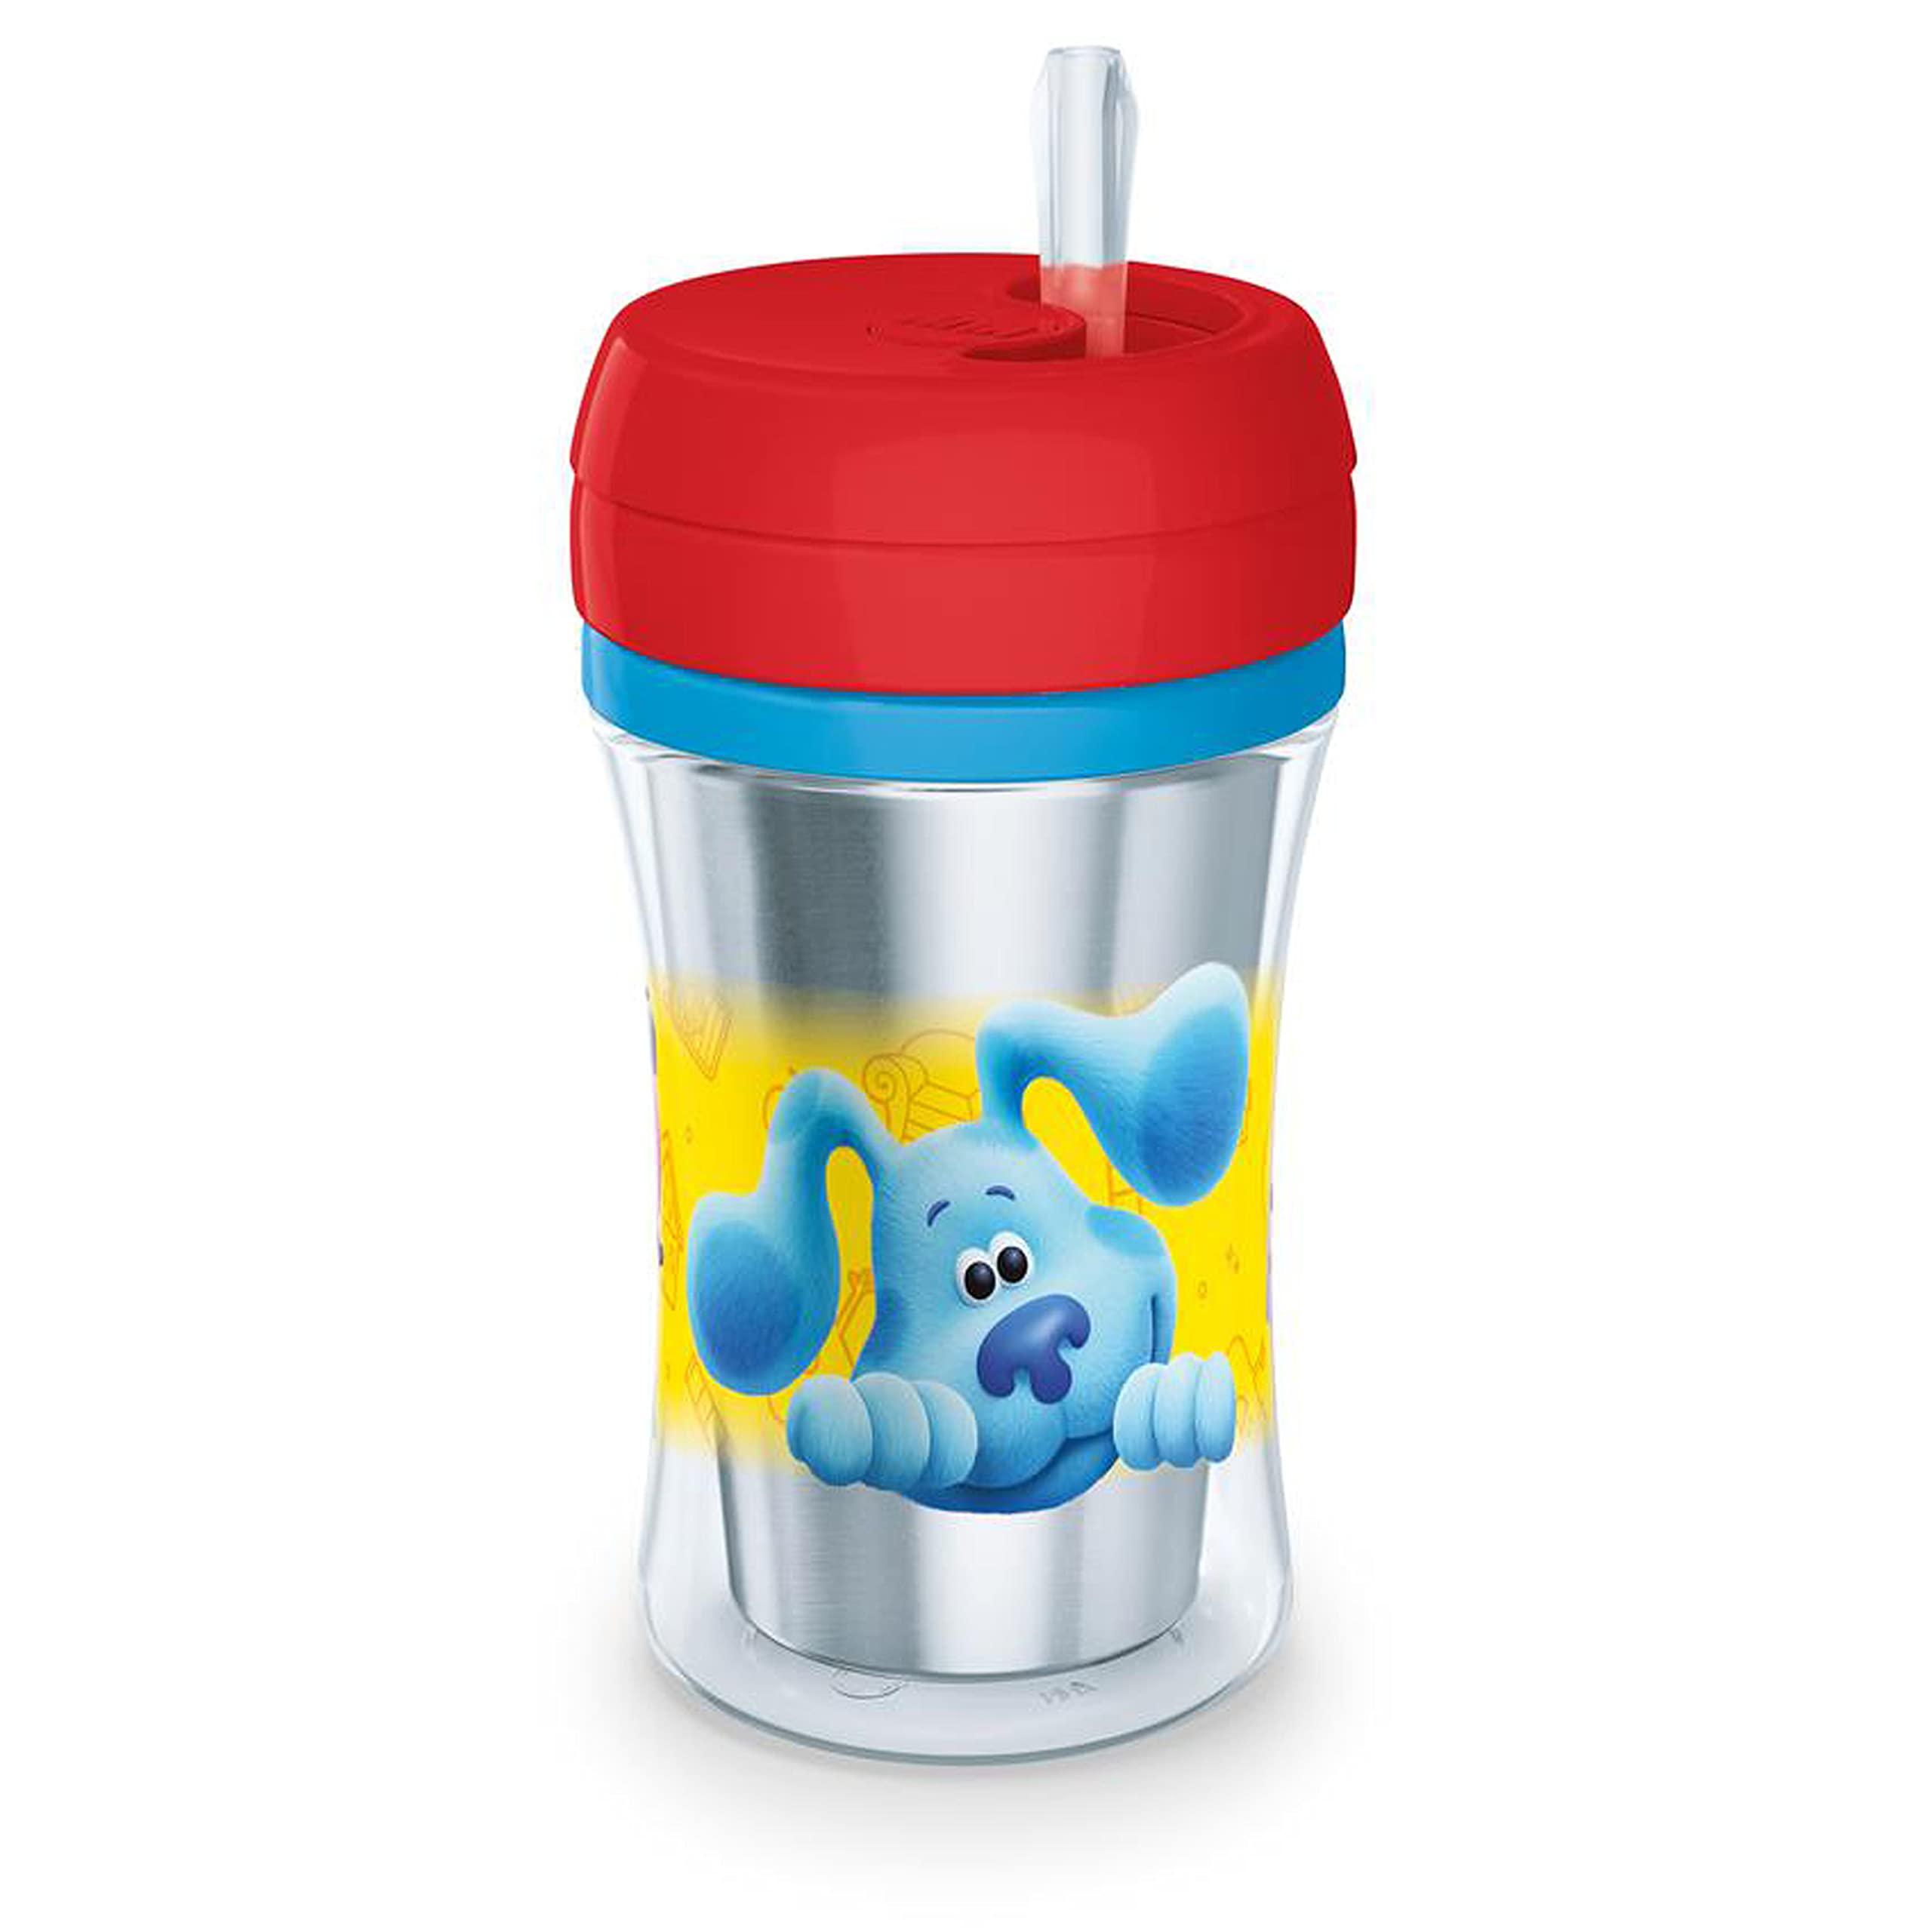 NUK Blue's Clues Insulated Straw Cup